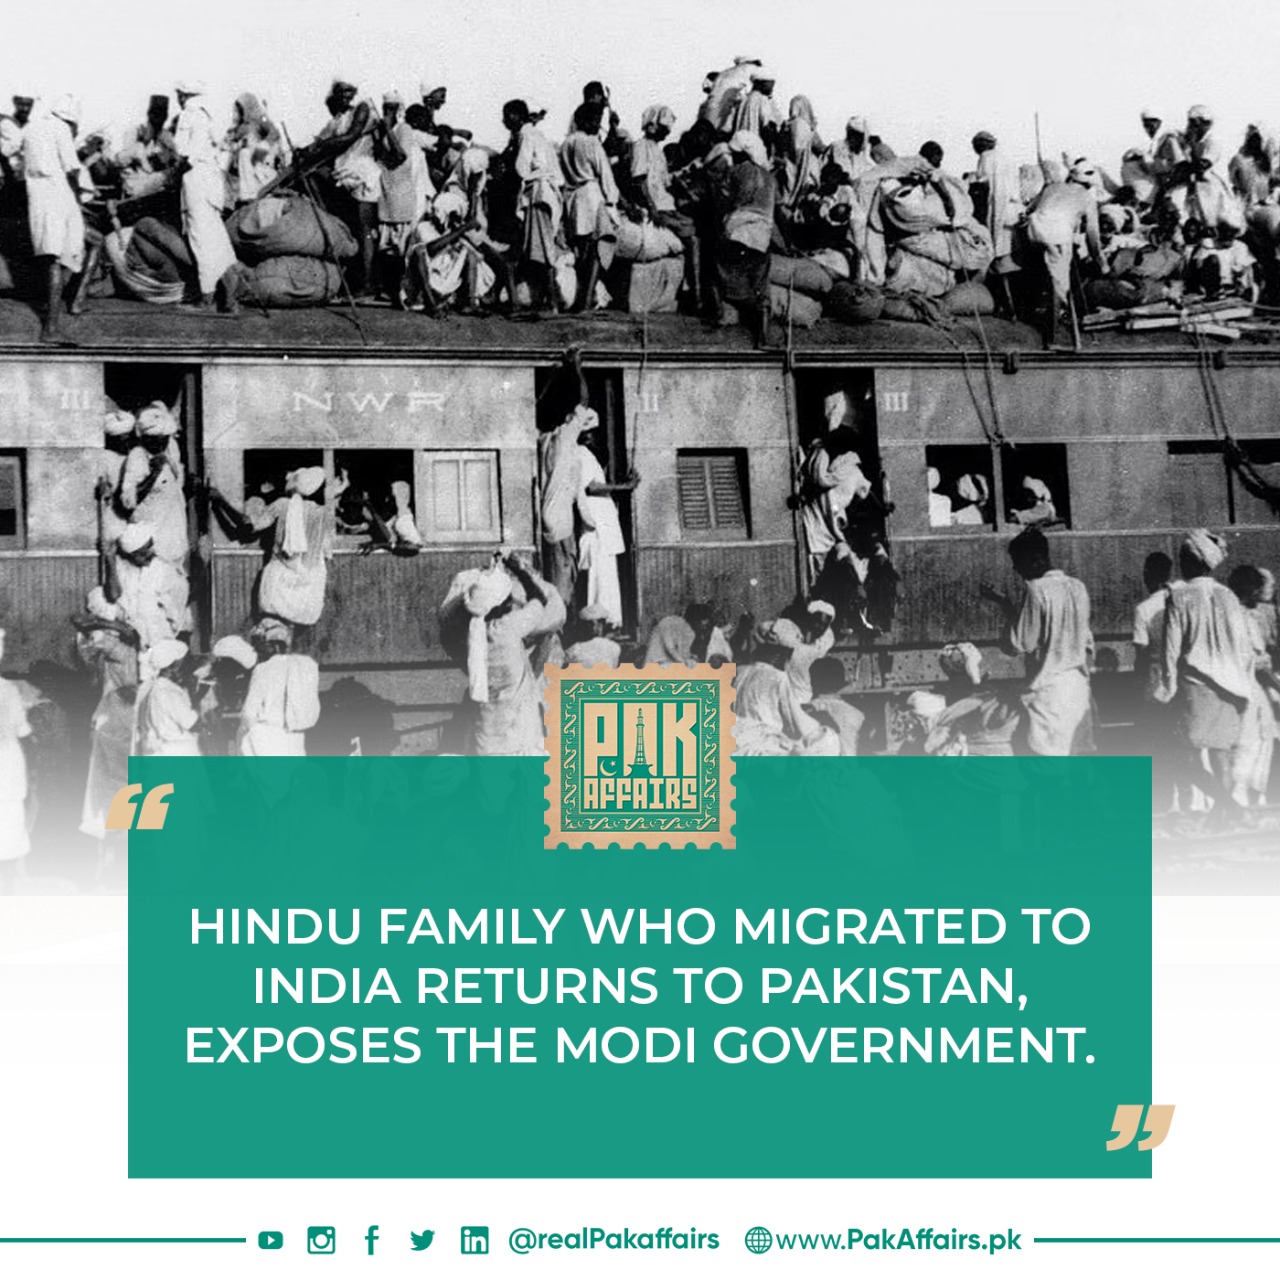 The Hindu family who migrated to India returned to Pakistan.